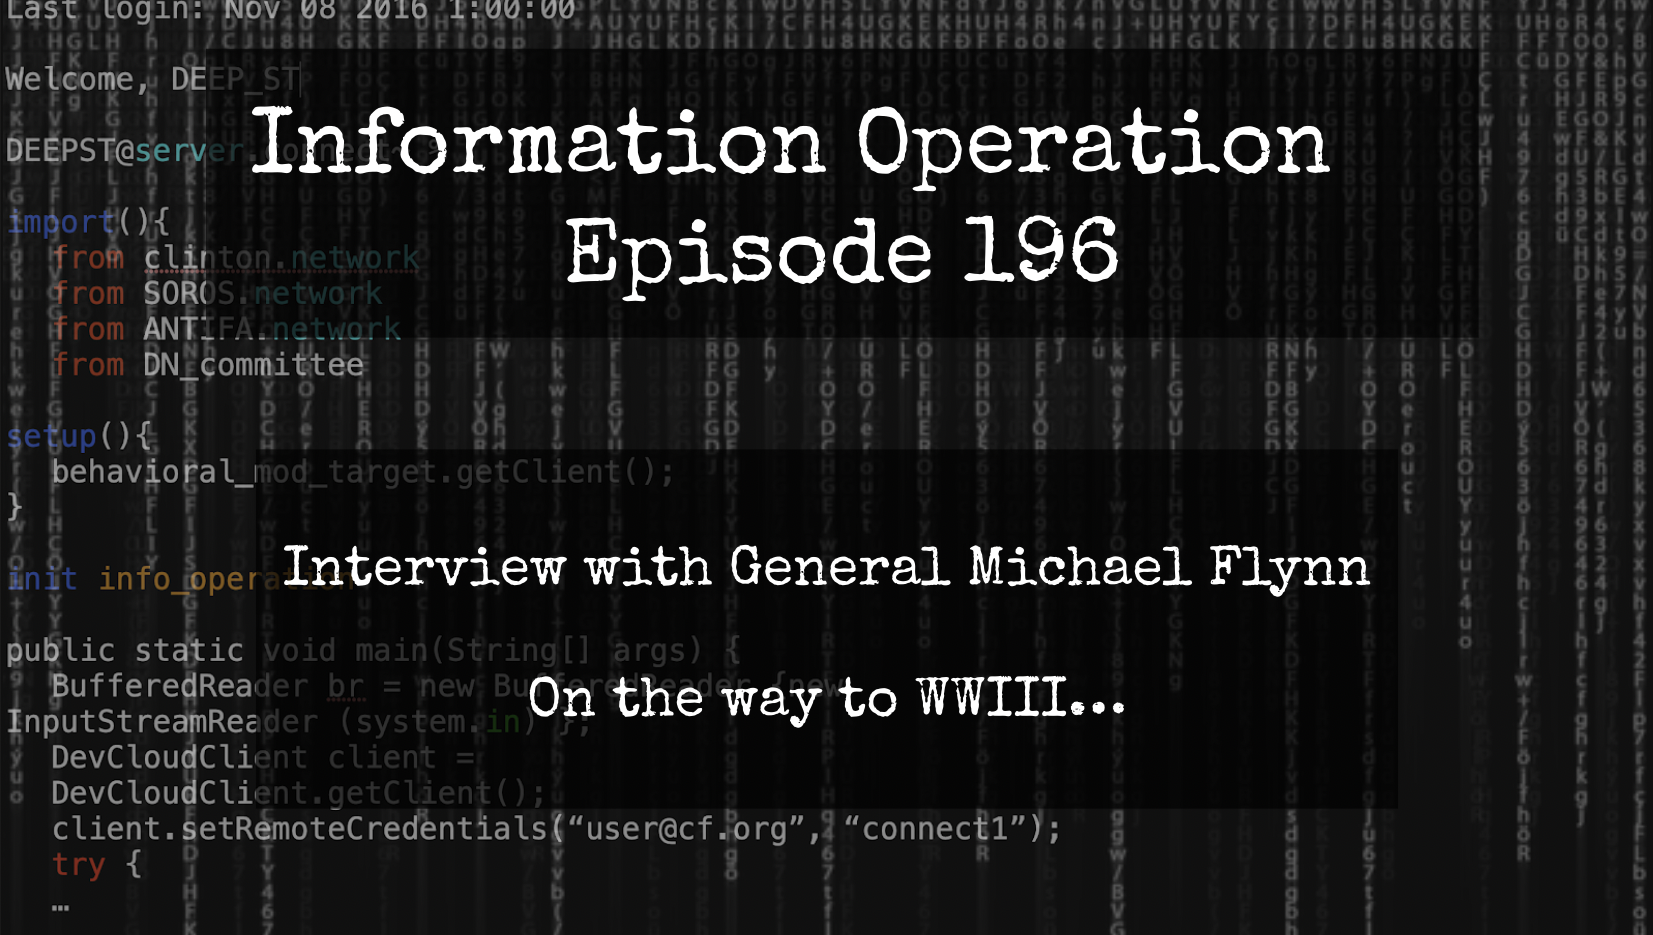 LIVE 7pm EST: Information Operation With General Michael Flynn